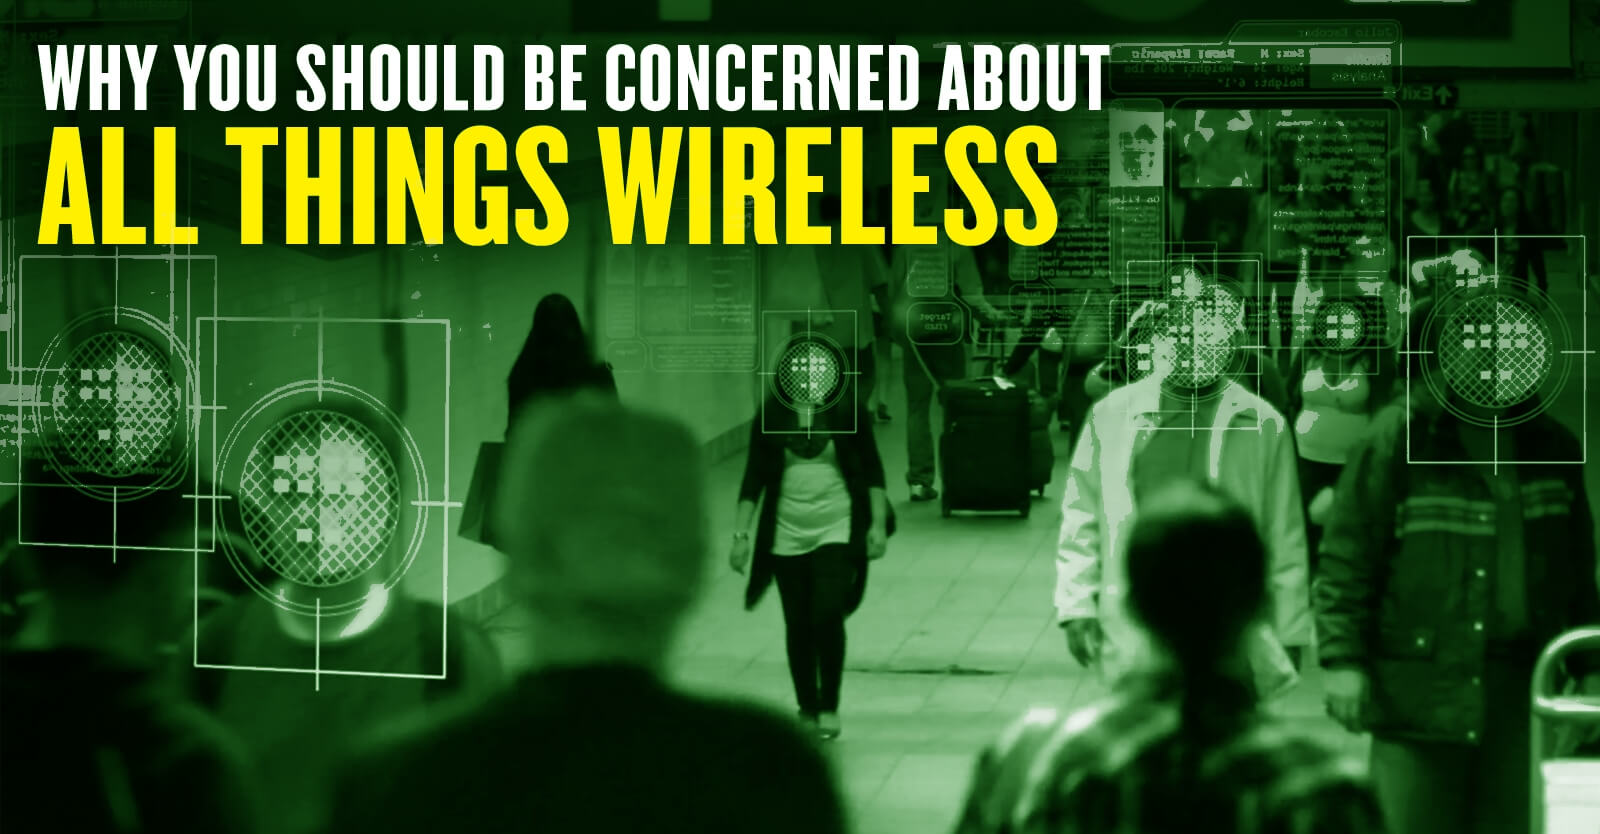 Why You Should Be Concerned About Wireless